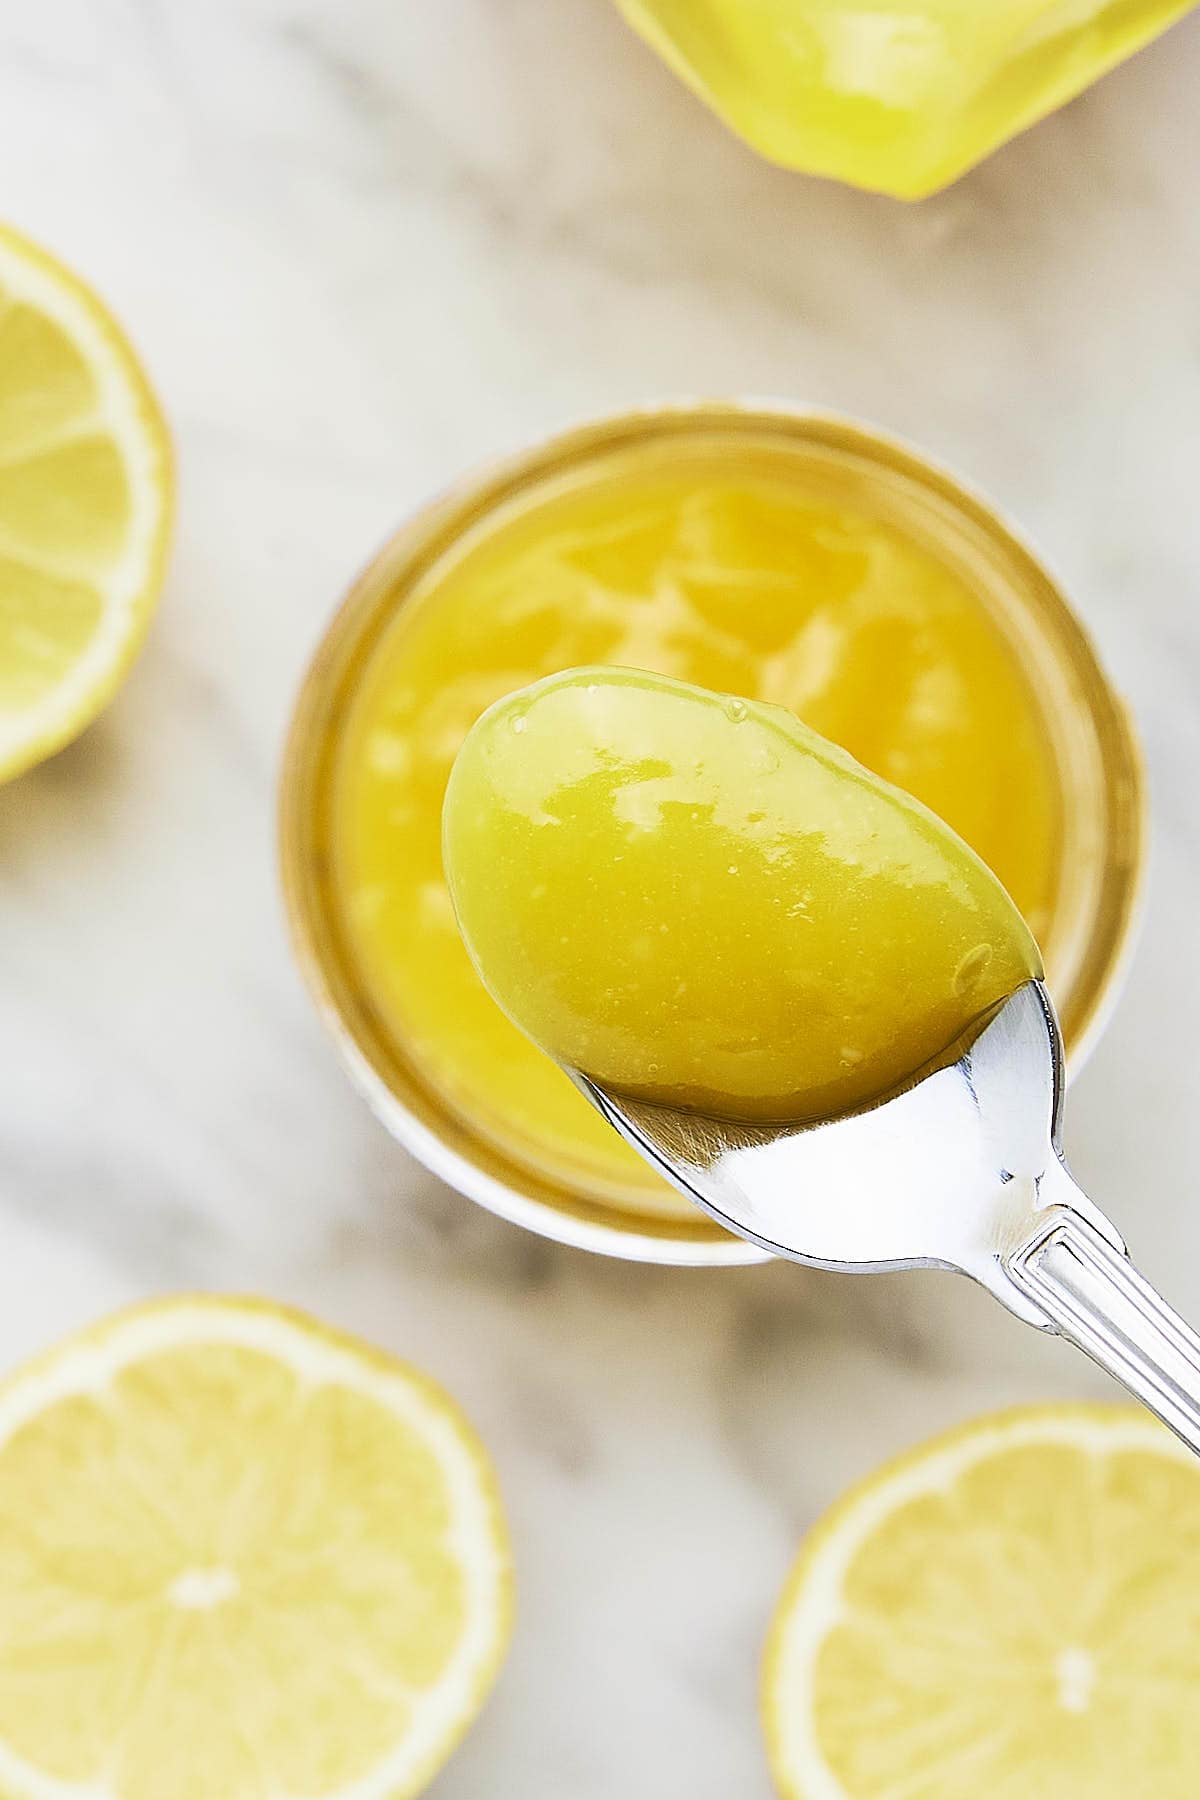 A spoonful of thick and rich homemade Lemon Curd.